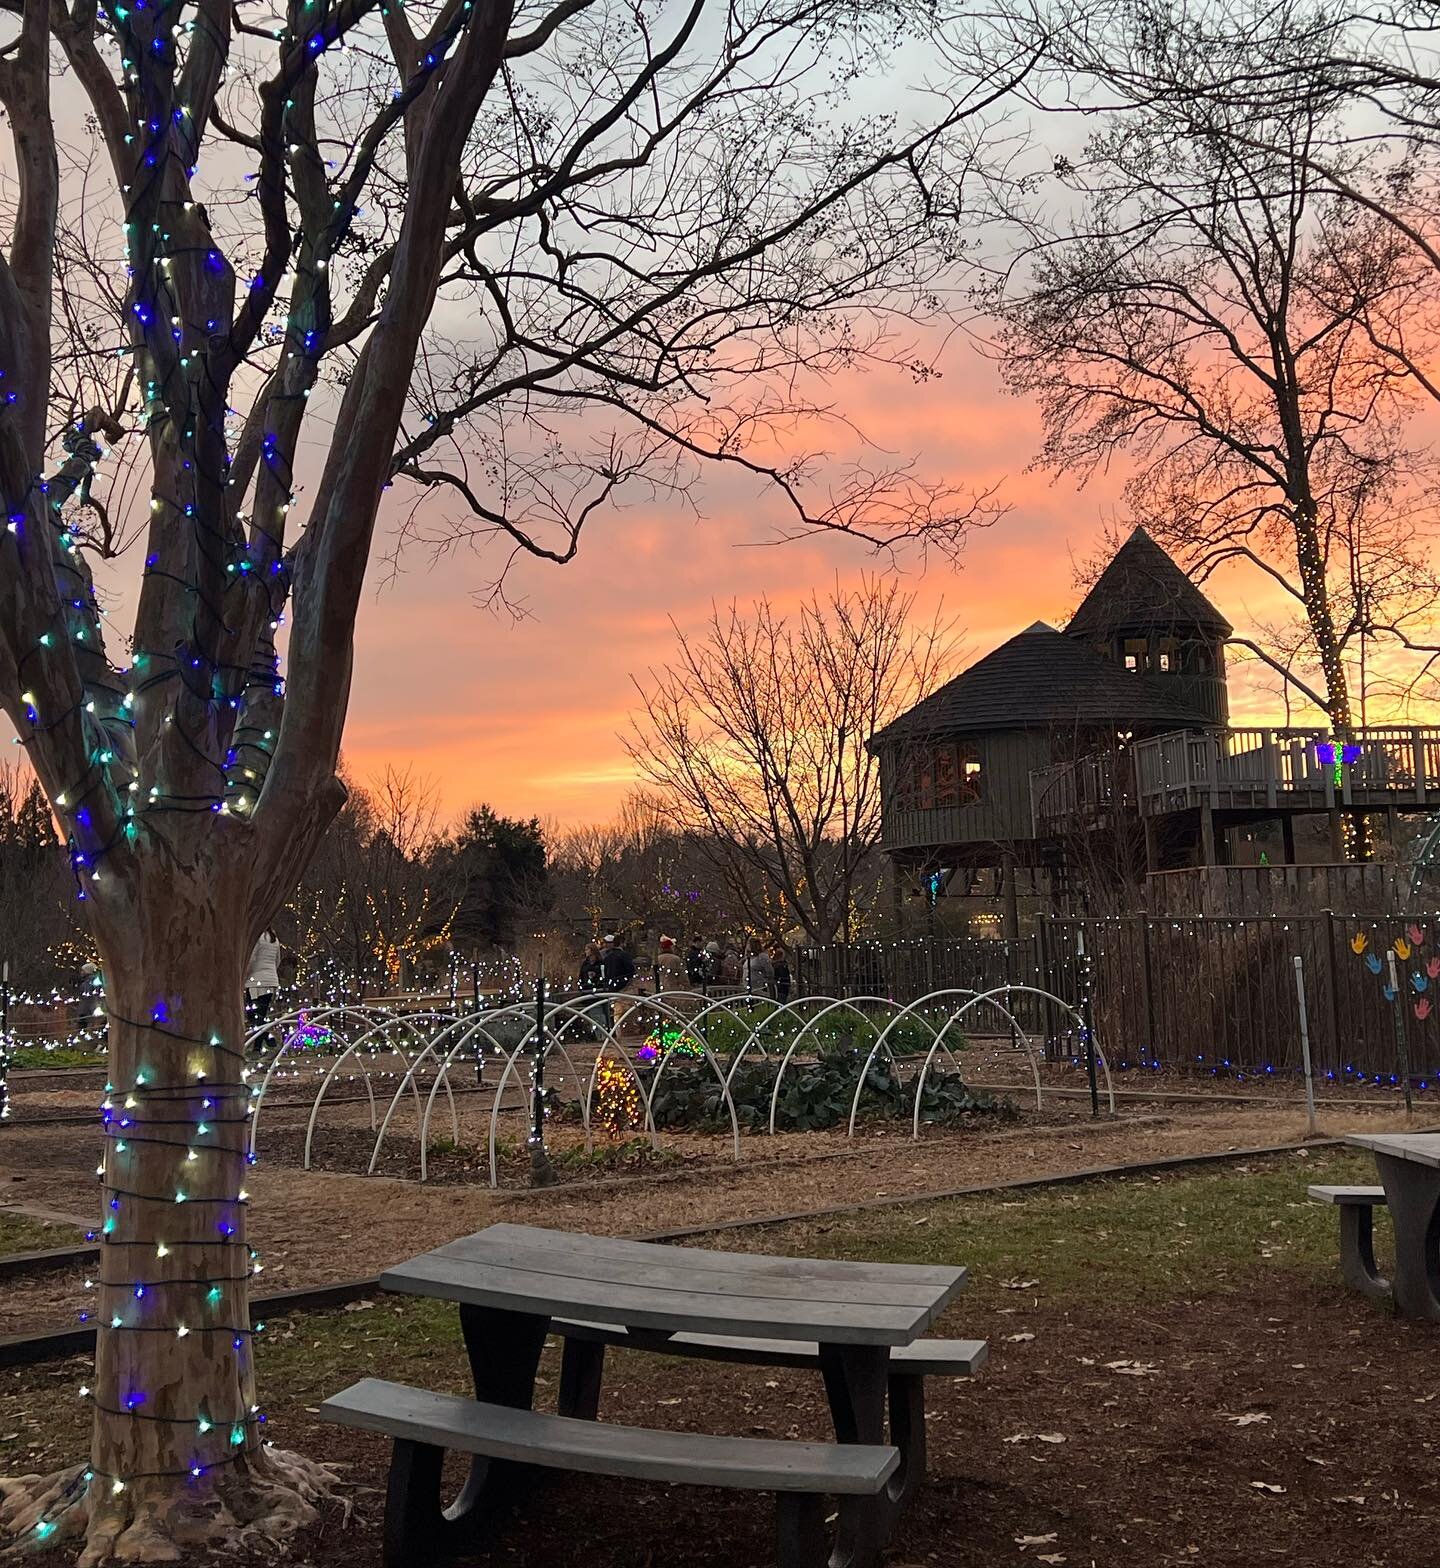 Come visit us at Lewis Ginter&rsquo;s Gardenfest of Lights tonight! We have sweet treats and hot drinks to keep your holiday spirit alive! ☕️✨🎁💫

Don&rsquo;t worry if you can&rsquo;t make it tonight, we&rsquo;ll be here through December 26th - Janu